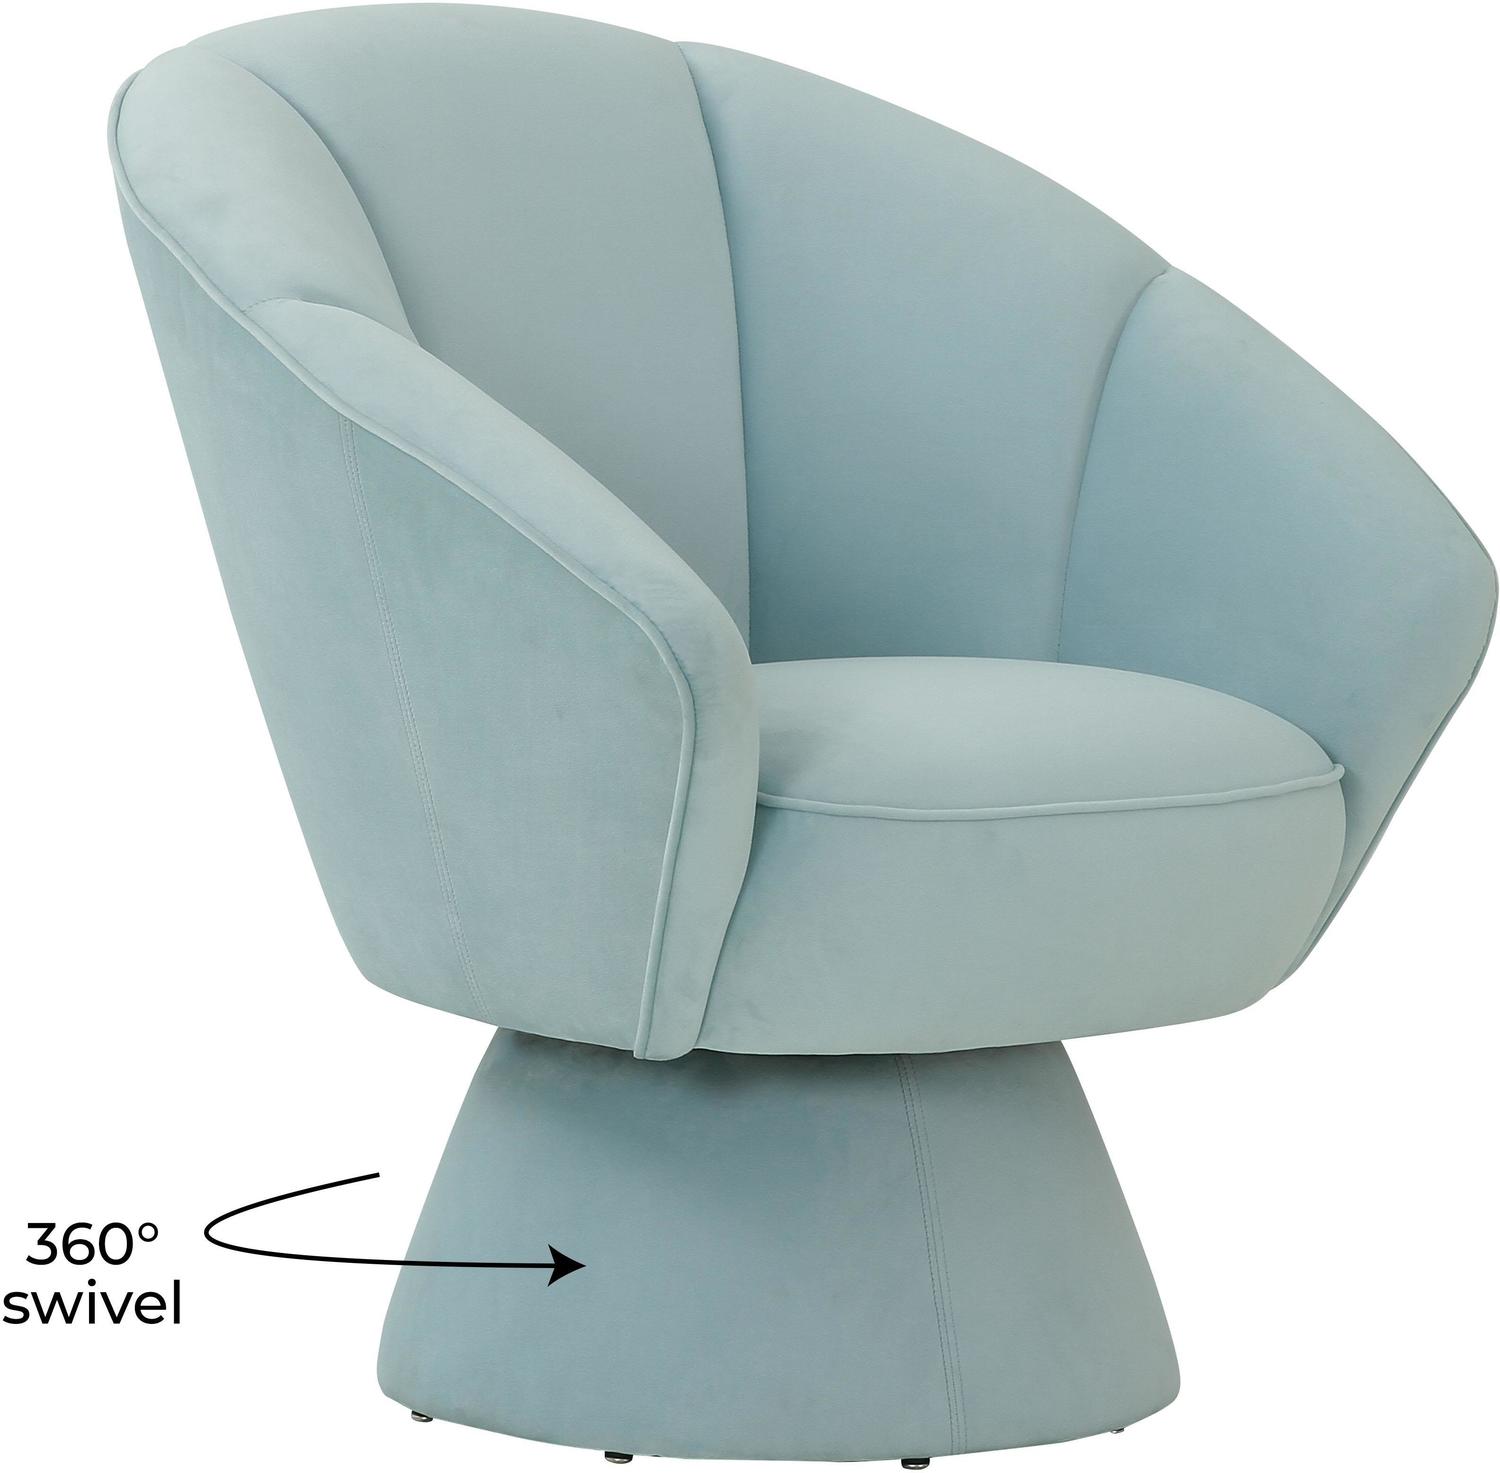 comfortable chaise lounge chair Tov Furniture Accent Chairs Light Blue